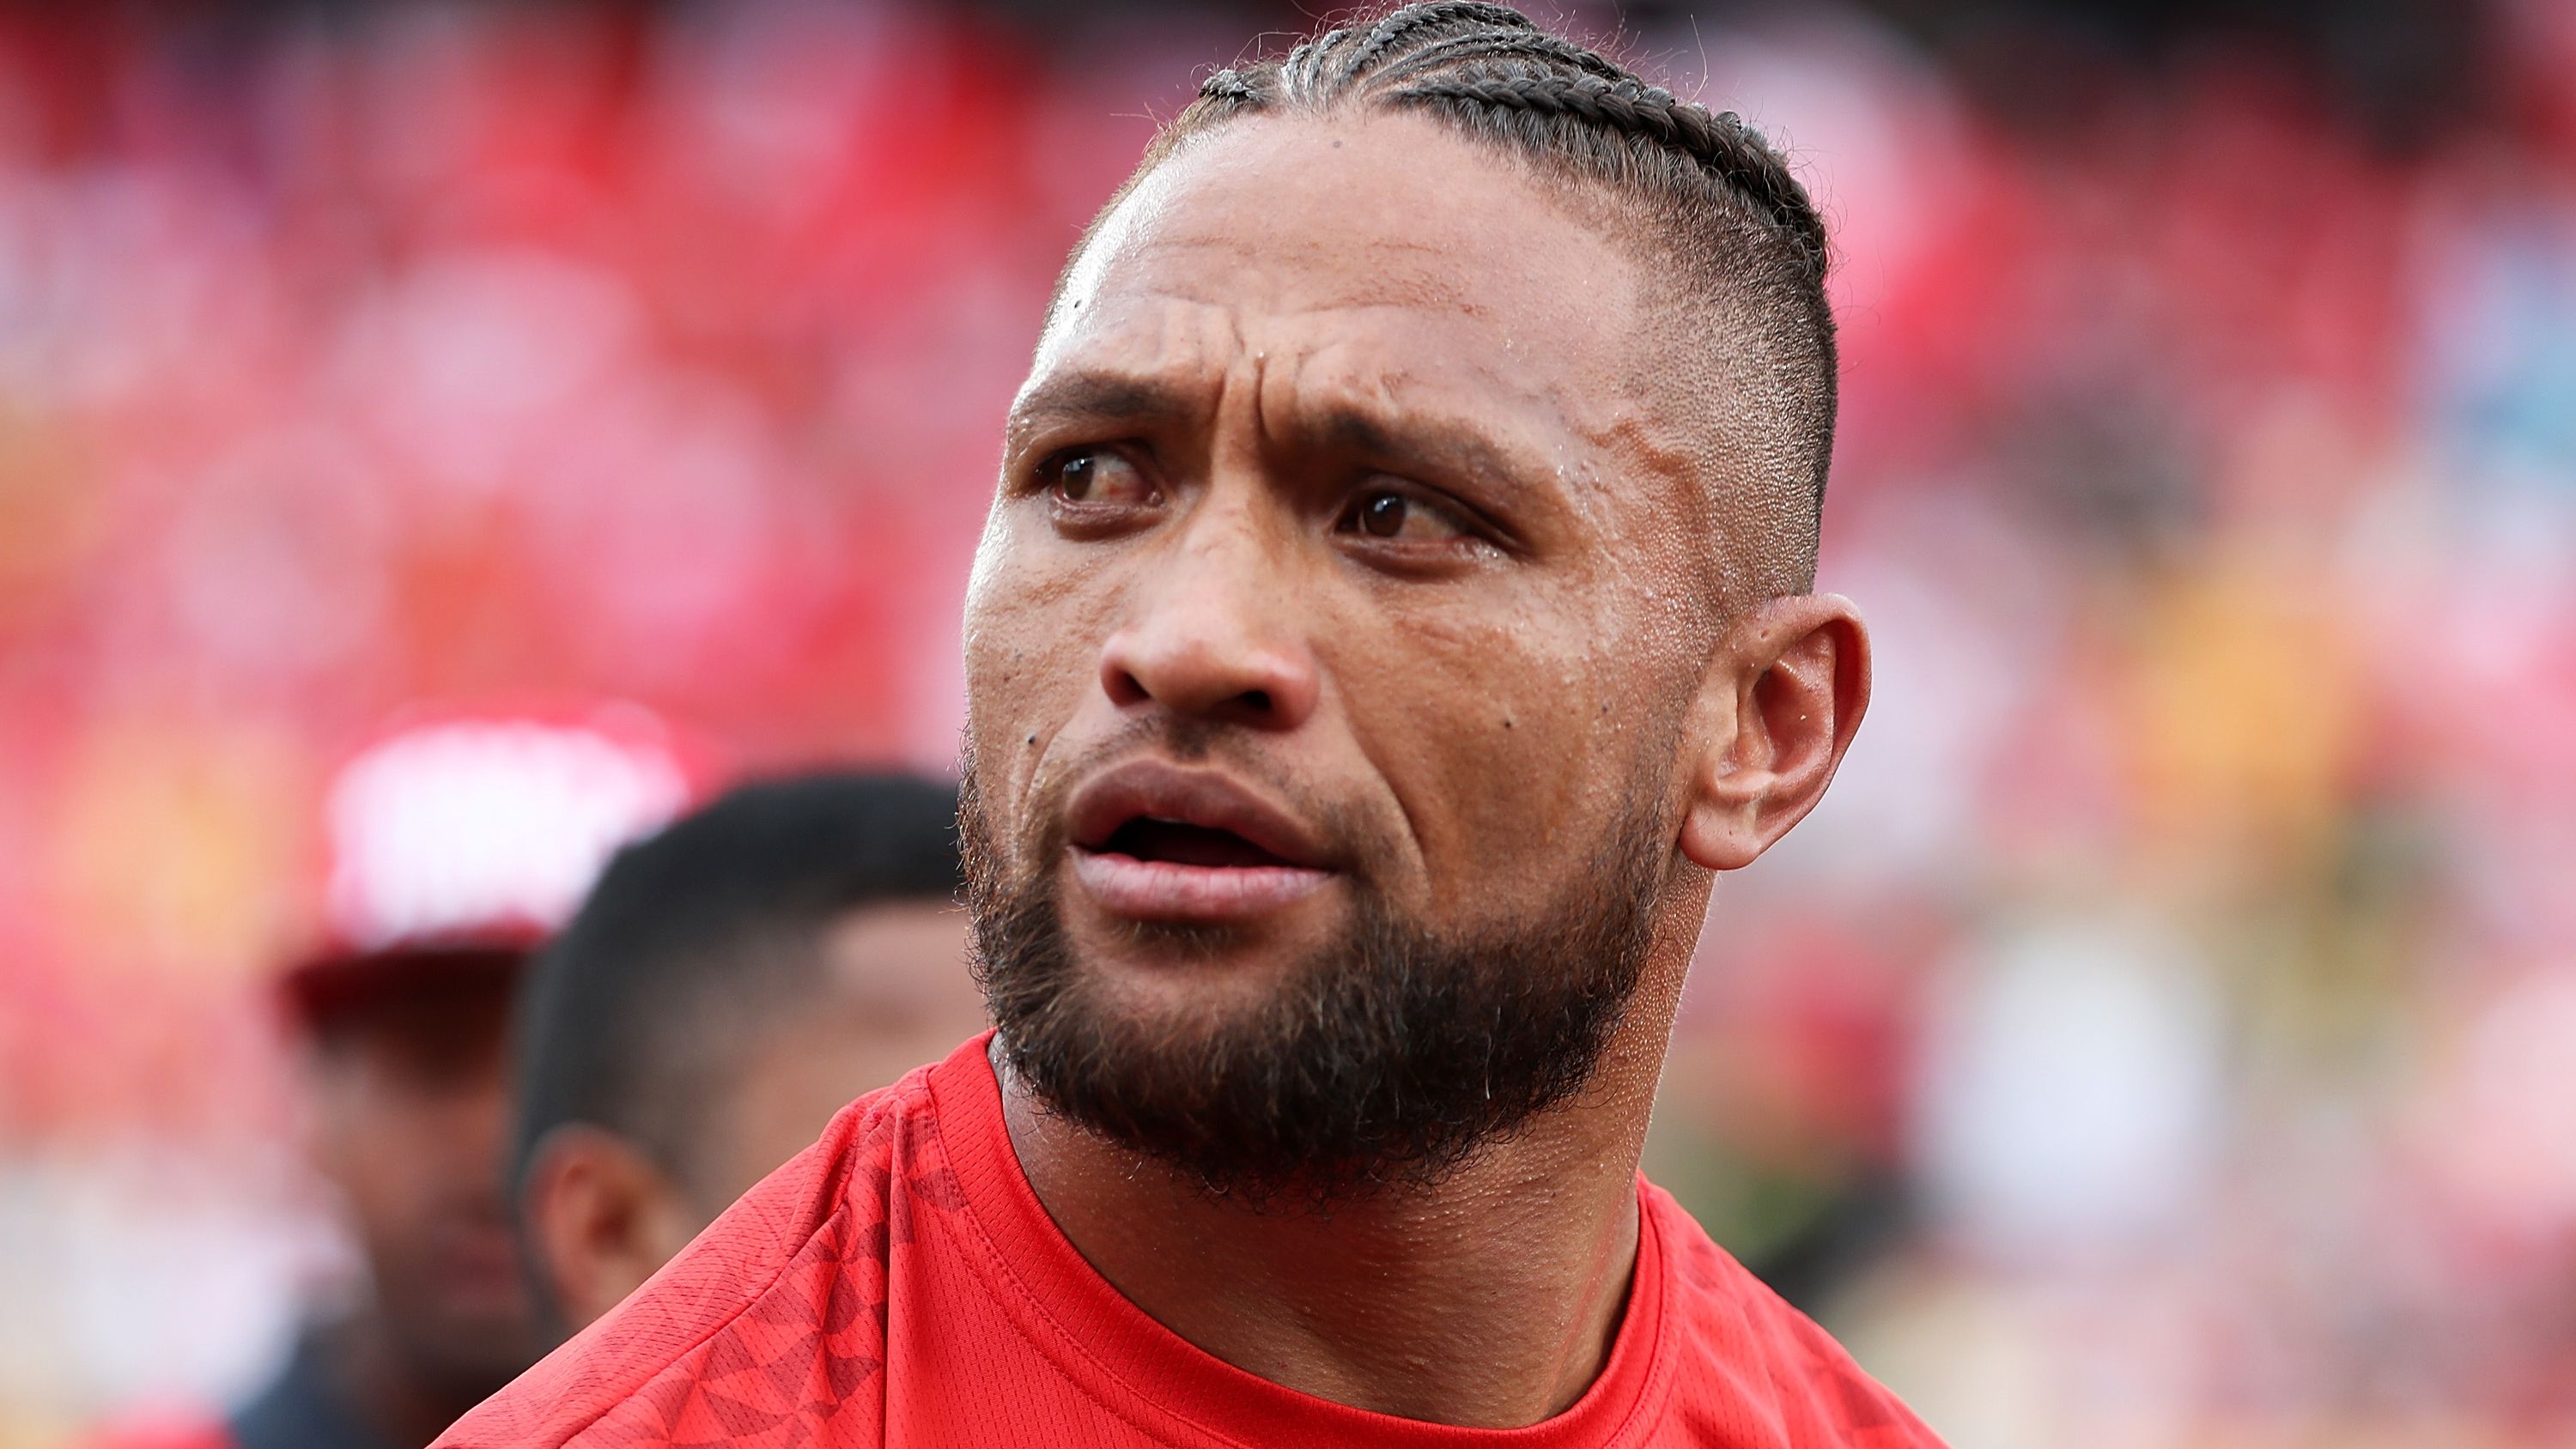 The sad demise of Manu Vatuvei, one of rugby league's greatest ever wingers